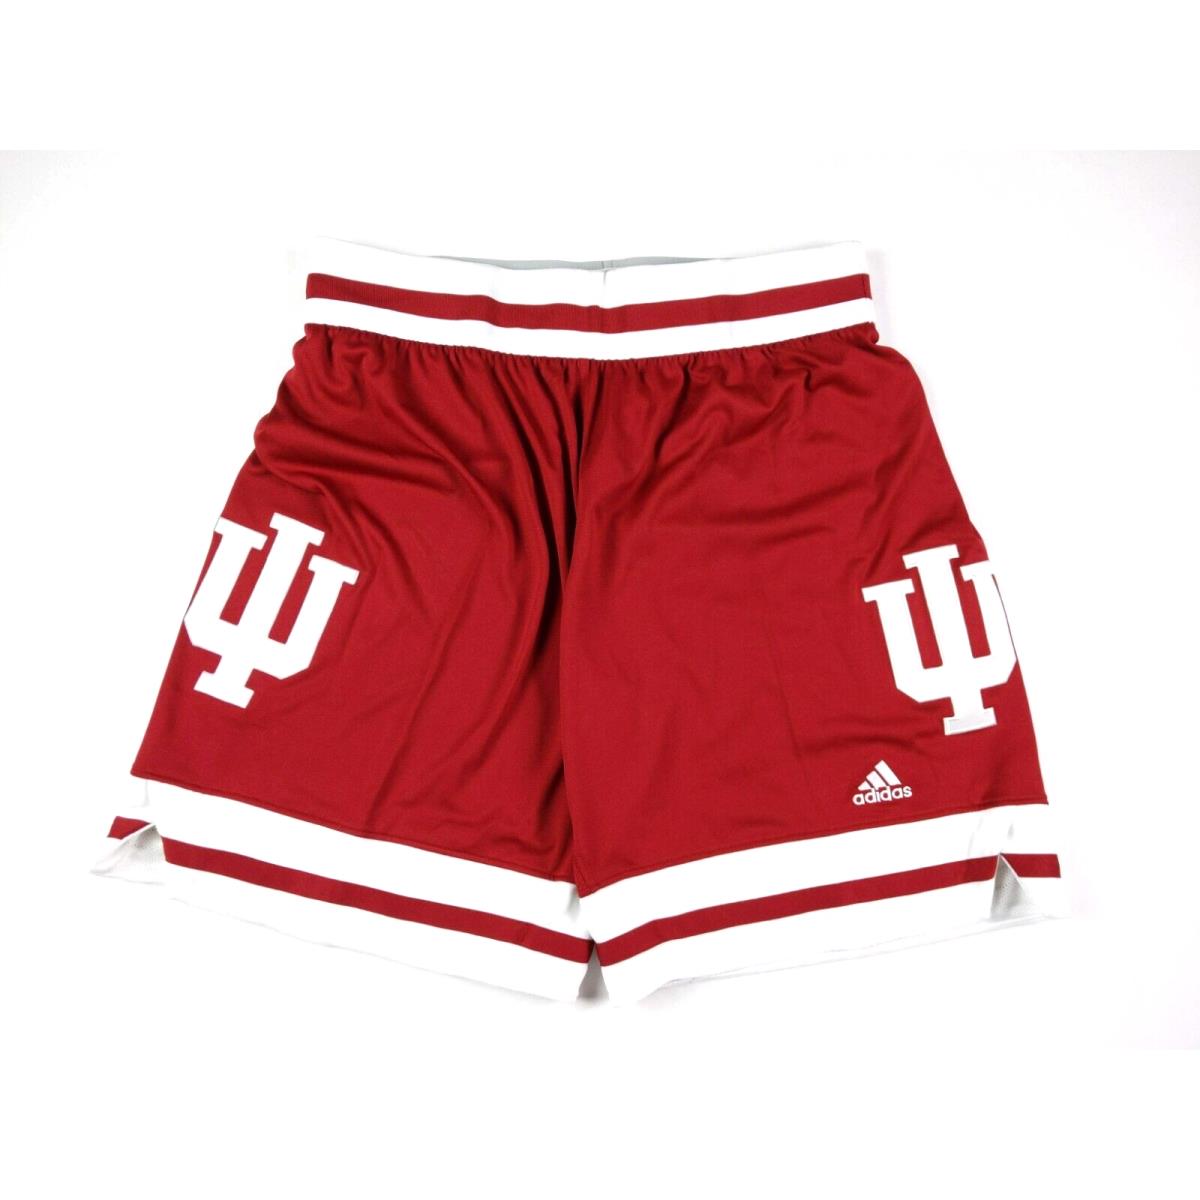 2018 Adidas Indiana Hoosiers Team Issued Basketball Shorts Mens XL Length +2